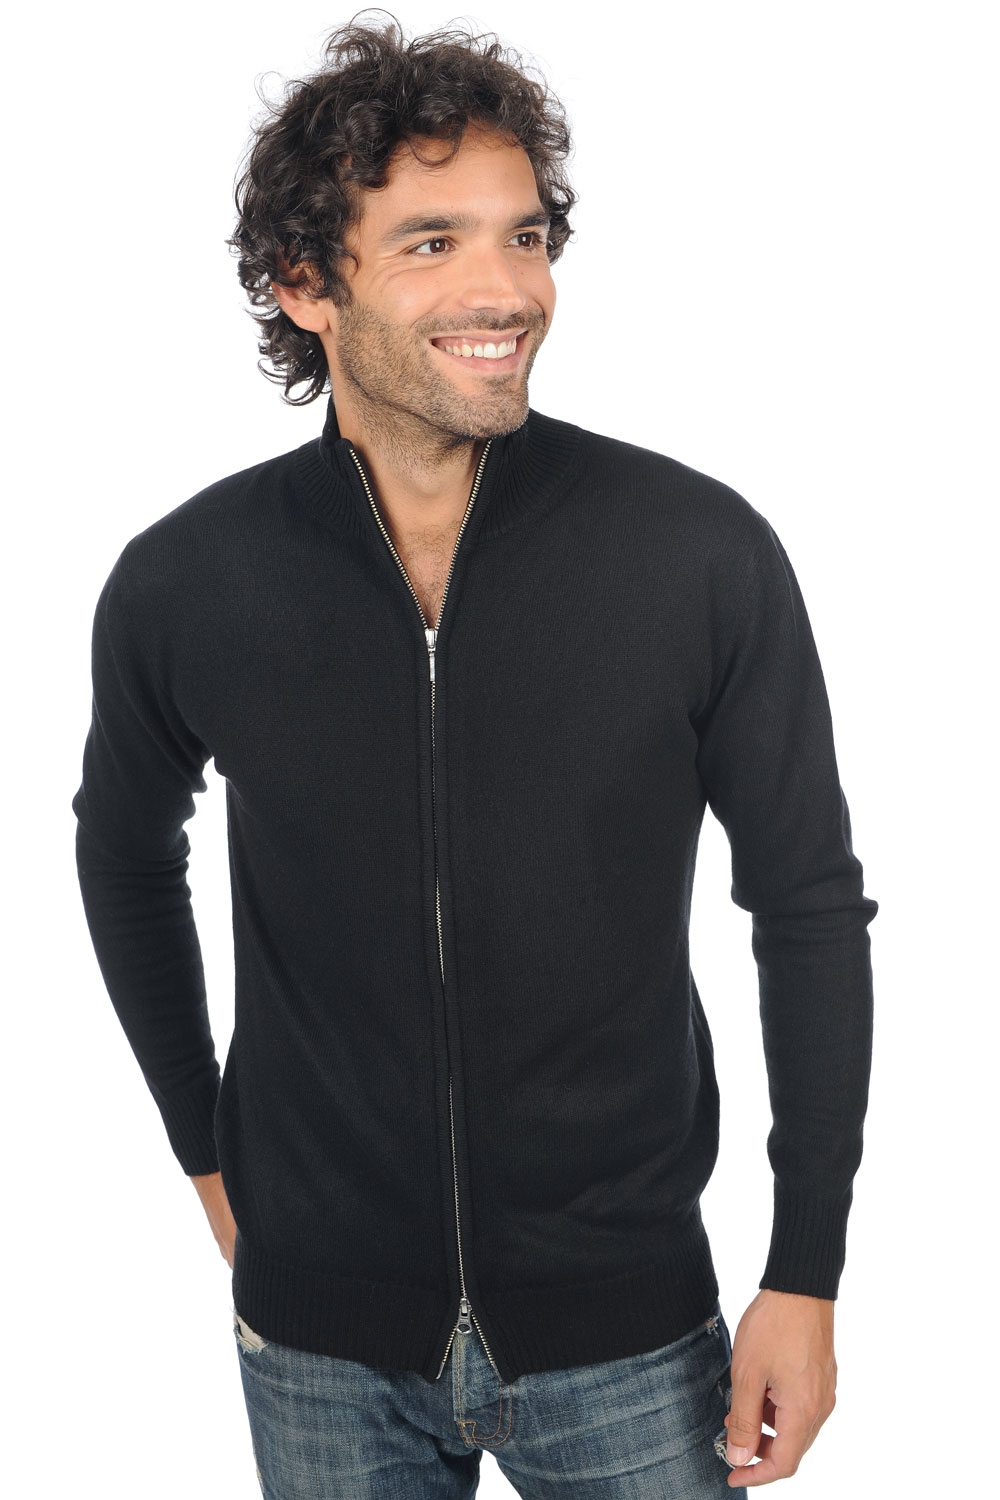 Cashmere men basic sweaters at low prices thobias first black 2xl